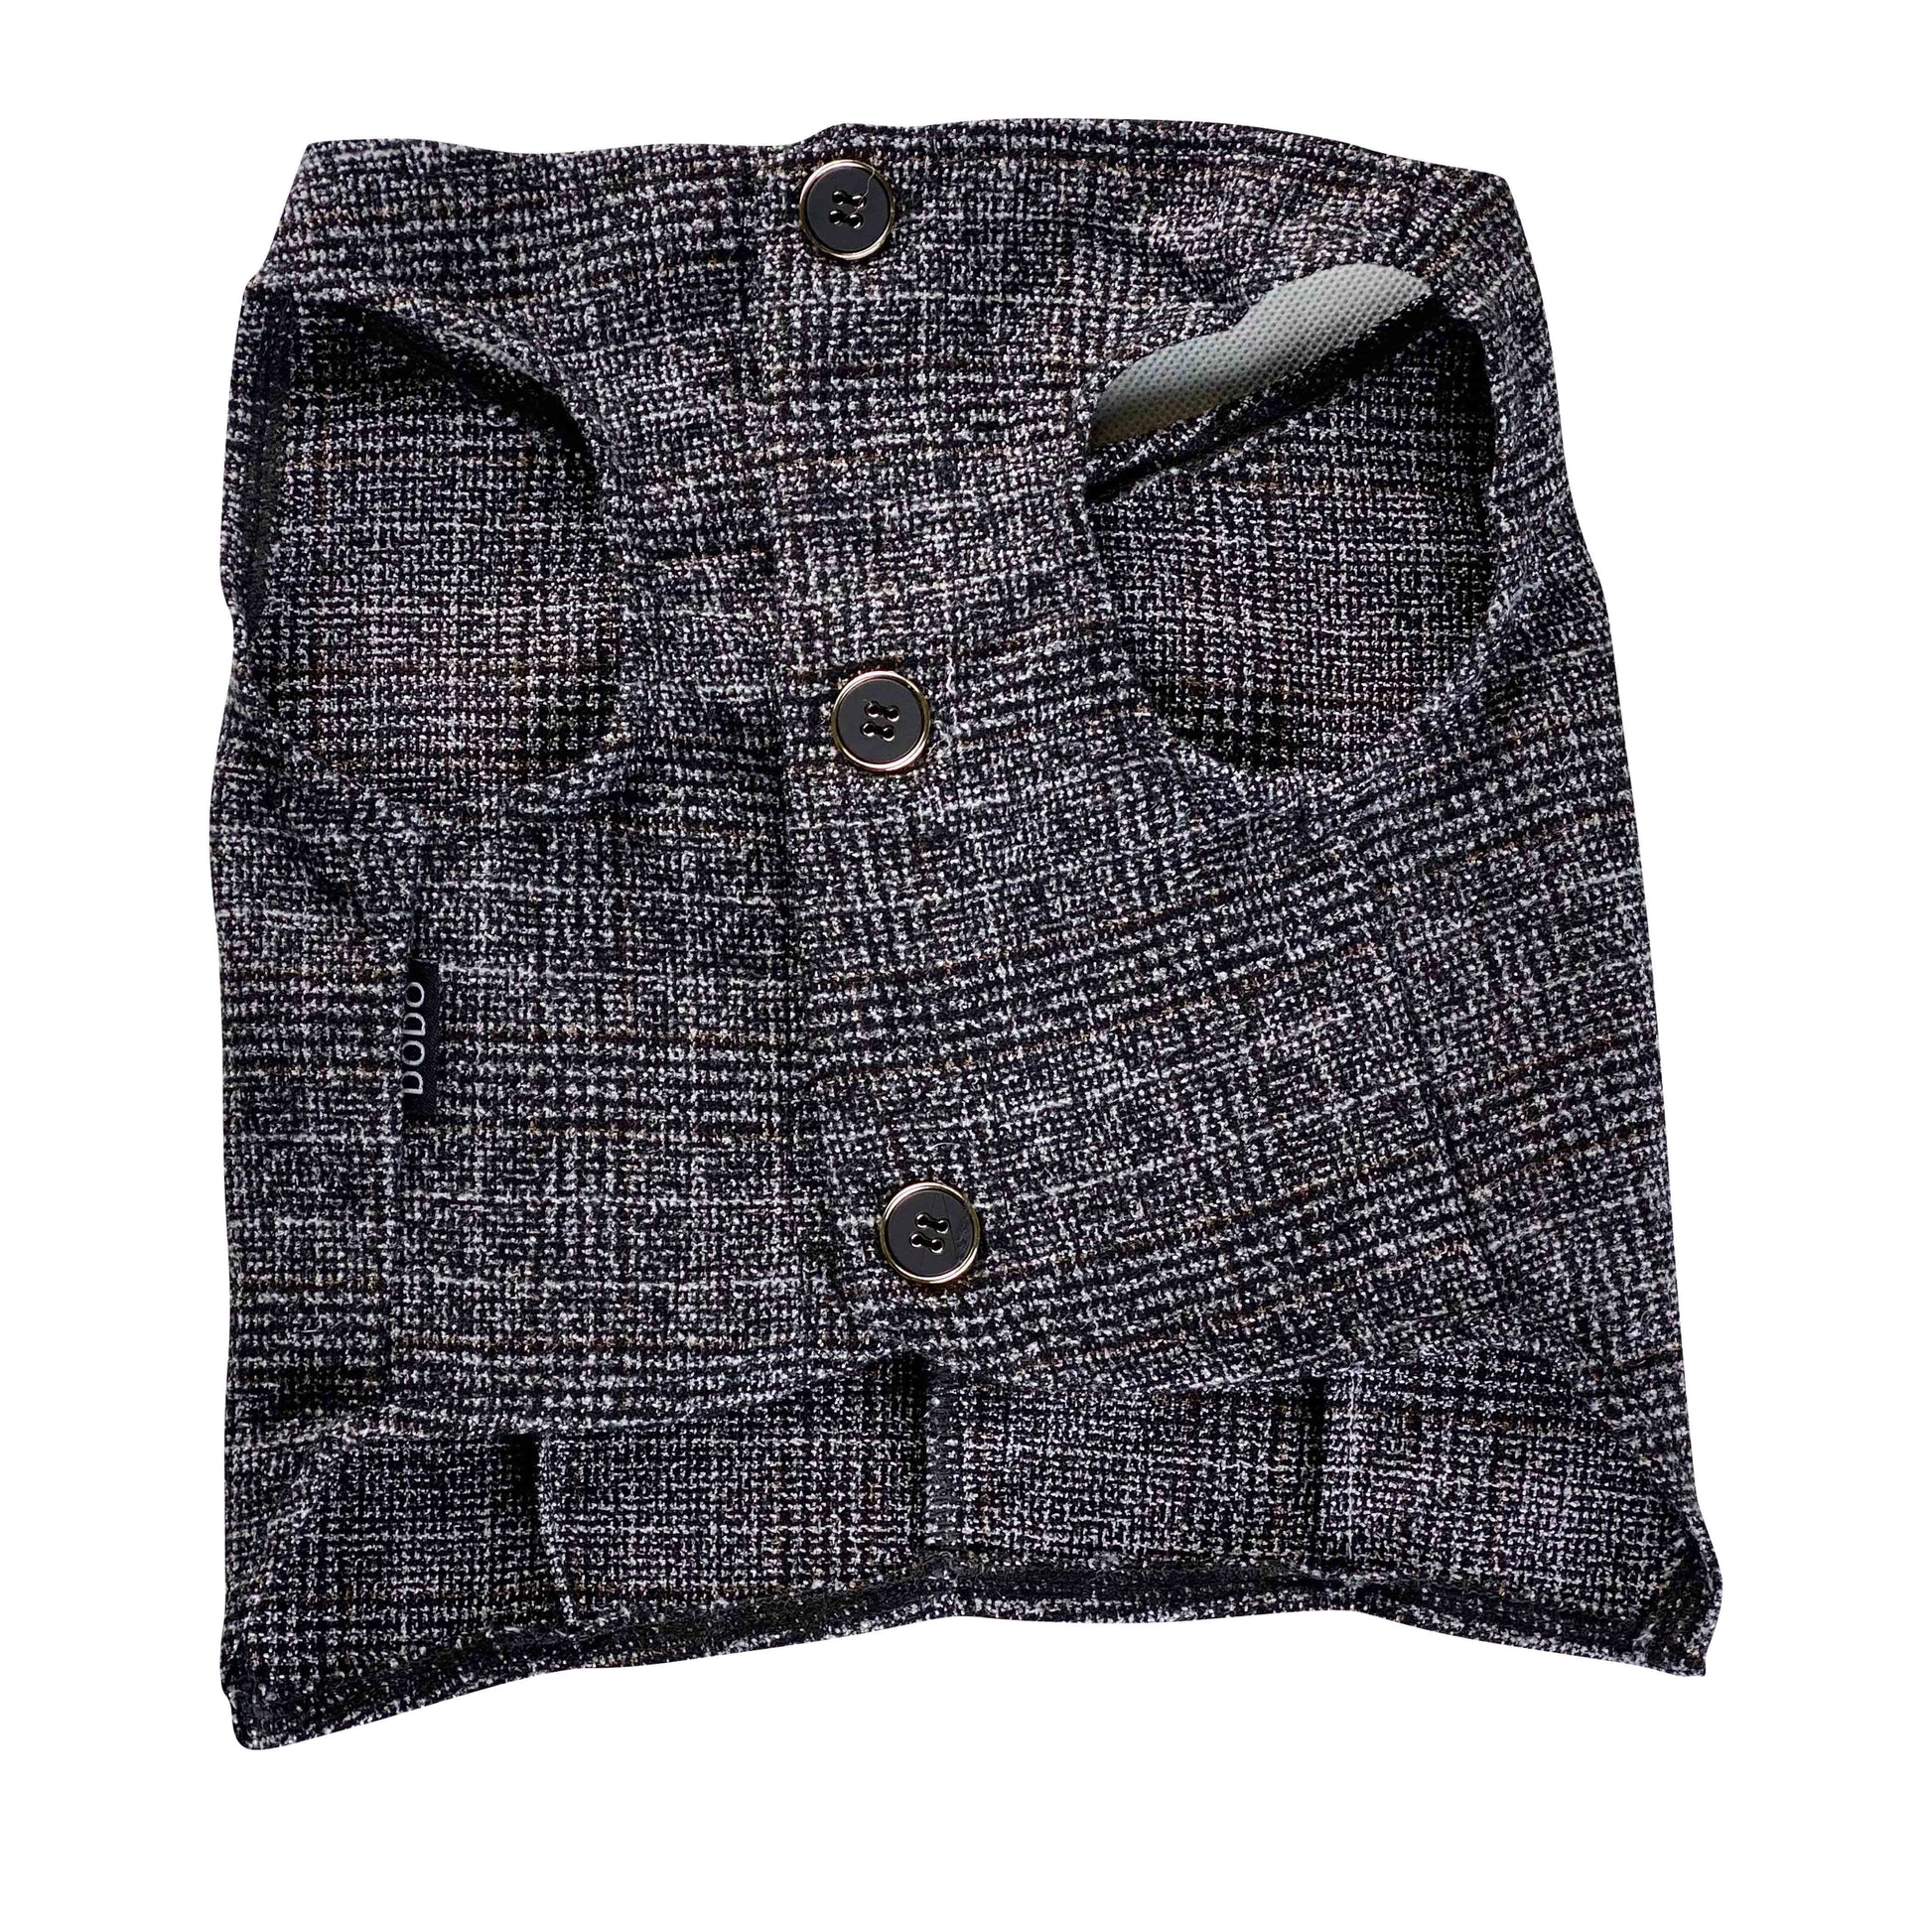 A grey tweed-look cotton vest for a Pug